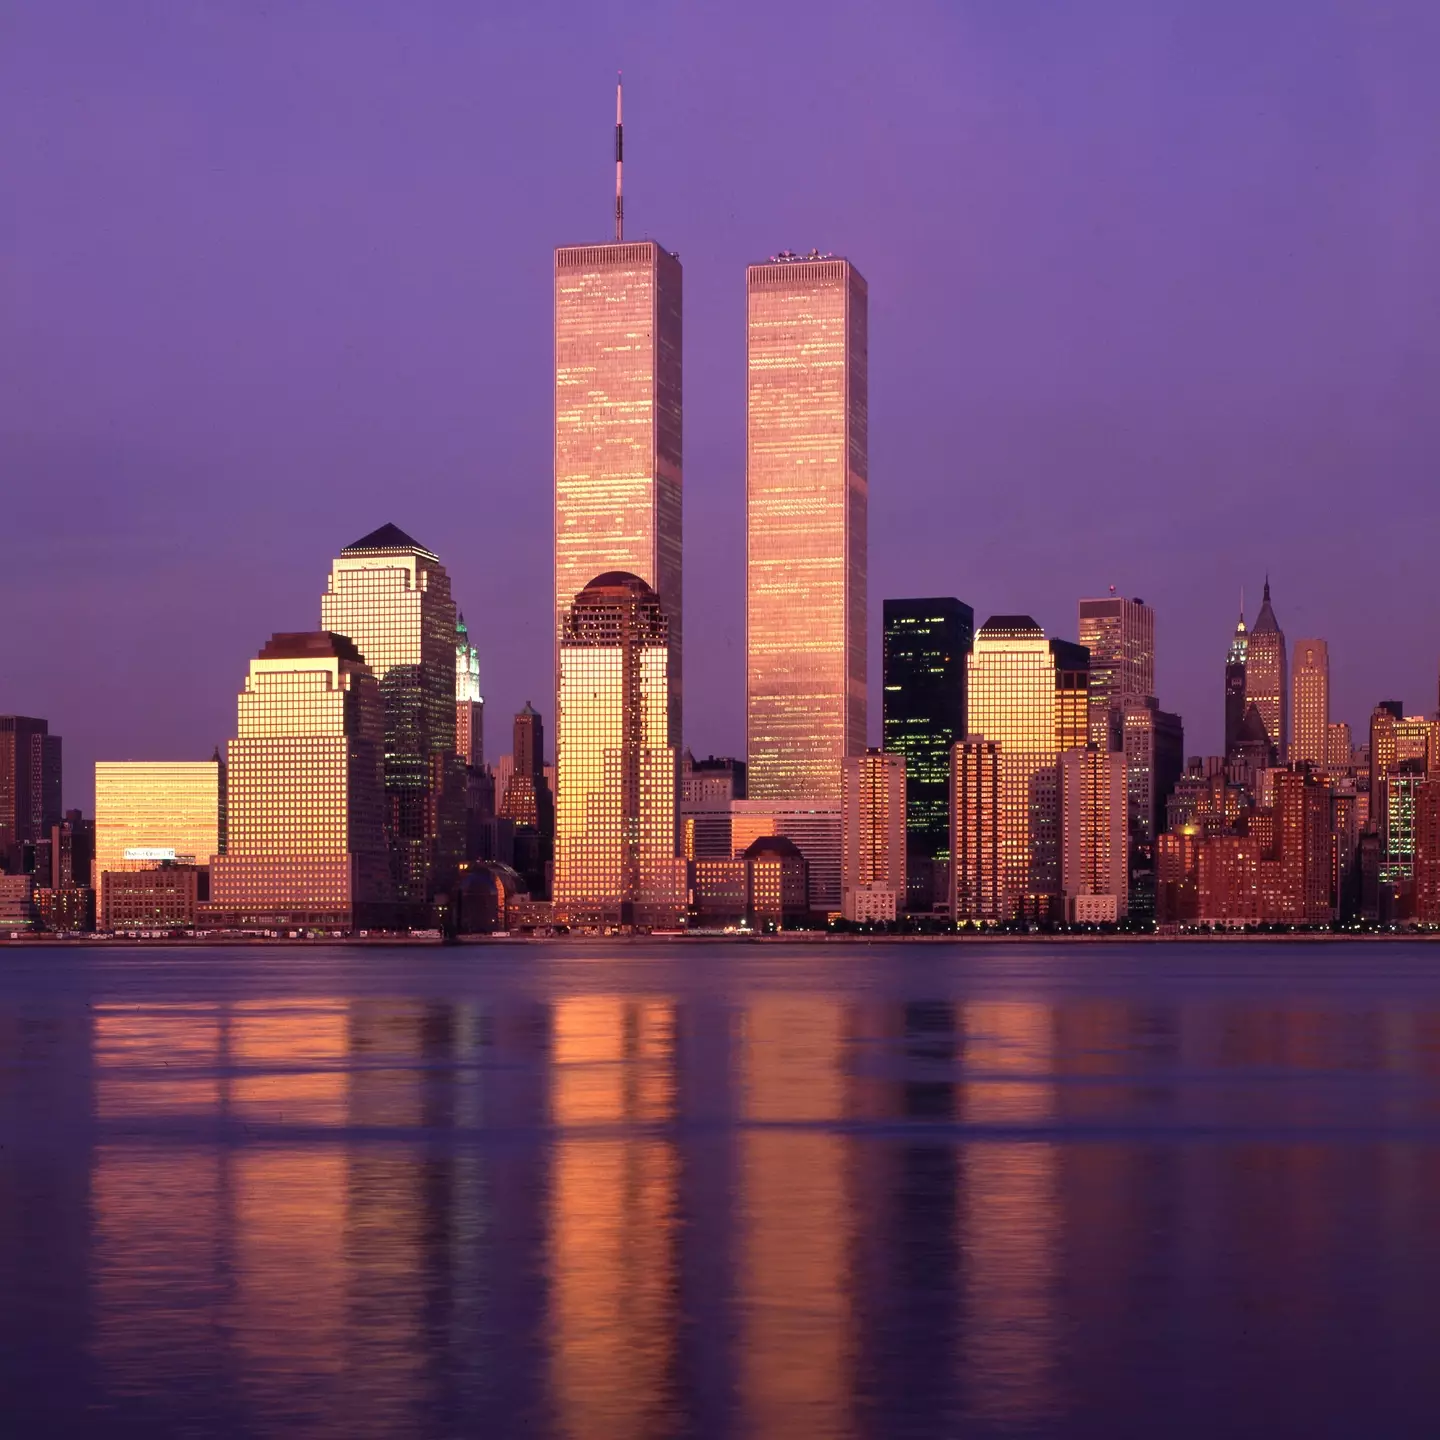 The Twin Towers saw two planes flown into them (